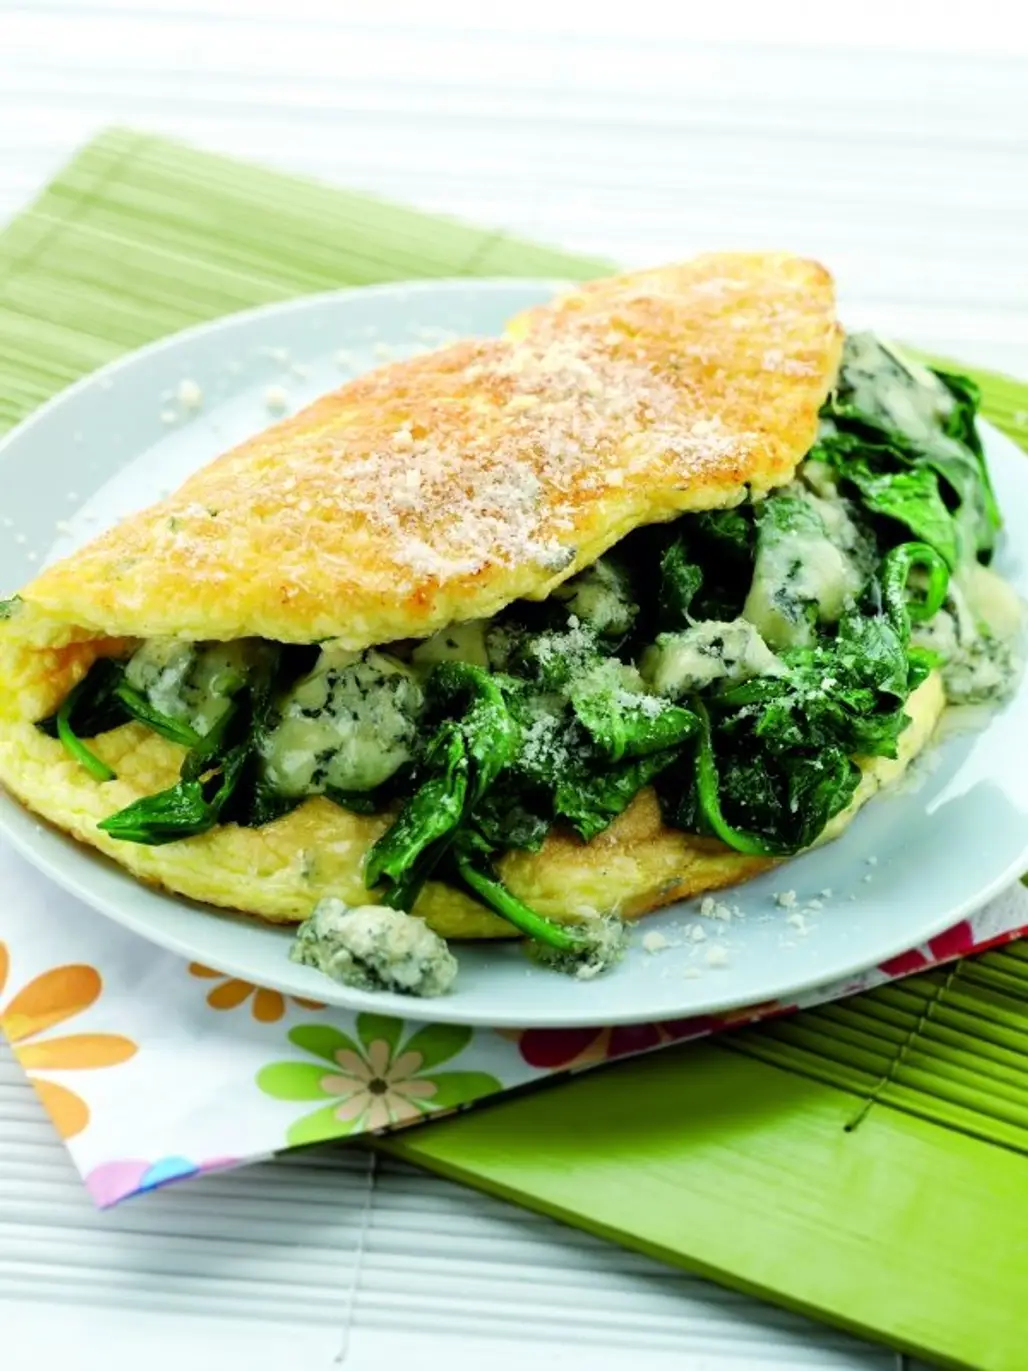 Add Veggies into Your Omelet